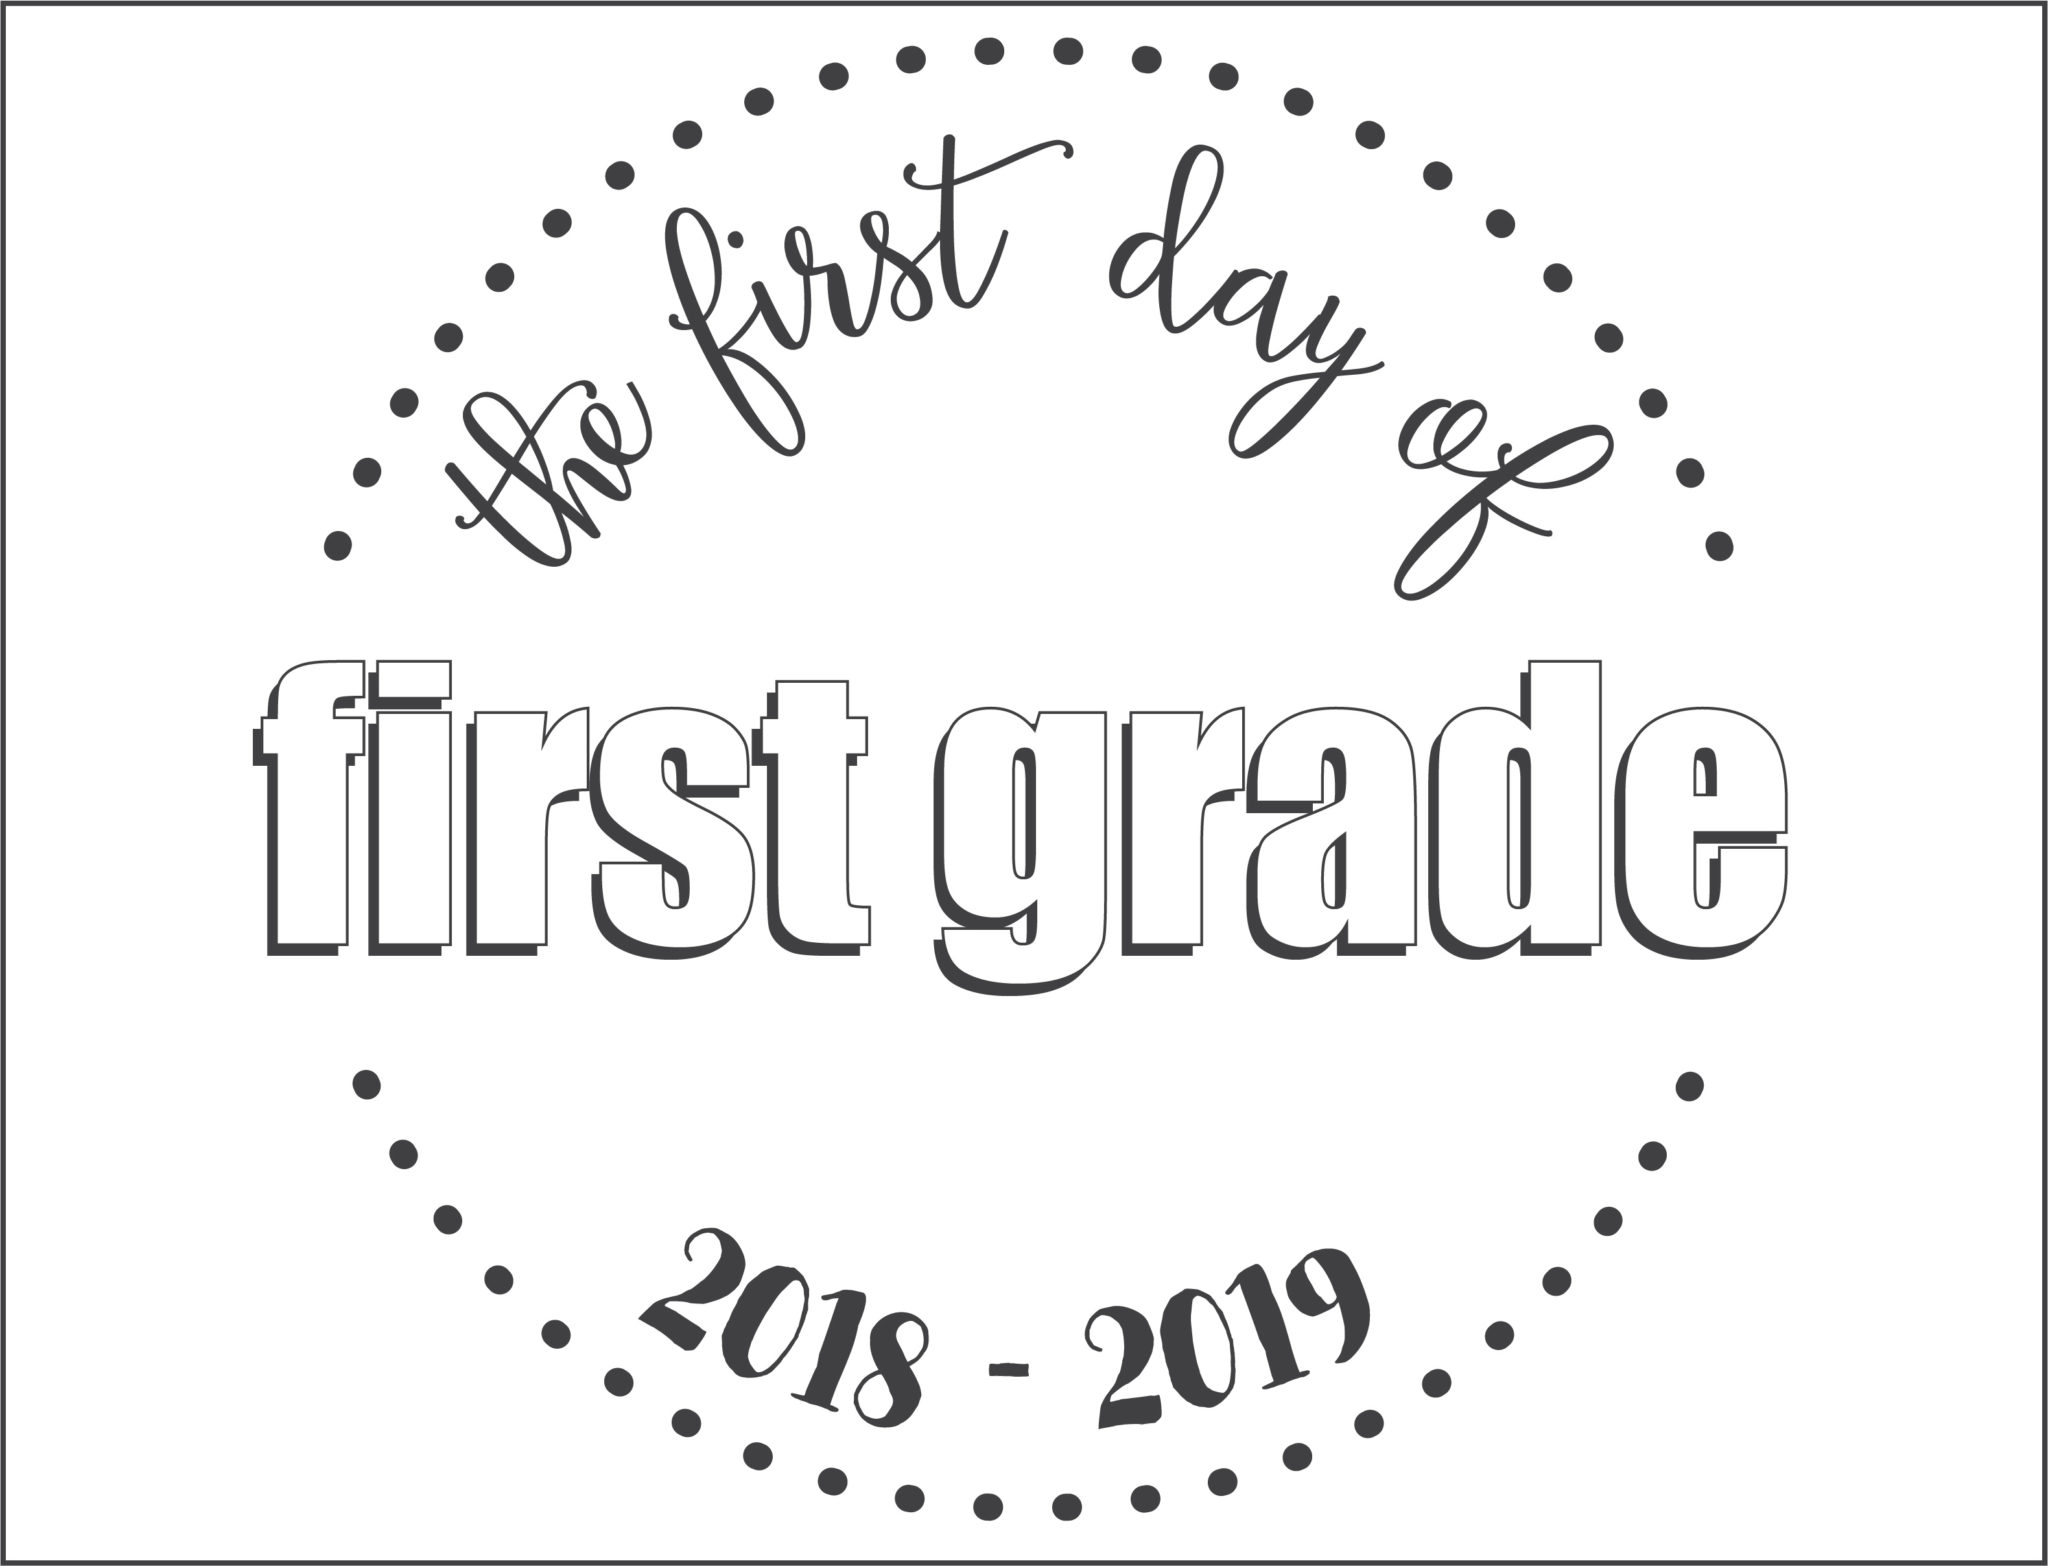 first-day-of-school-printables-free-21-layouts-of-pre-k-6th